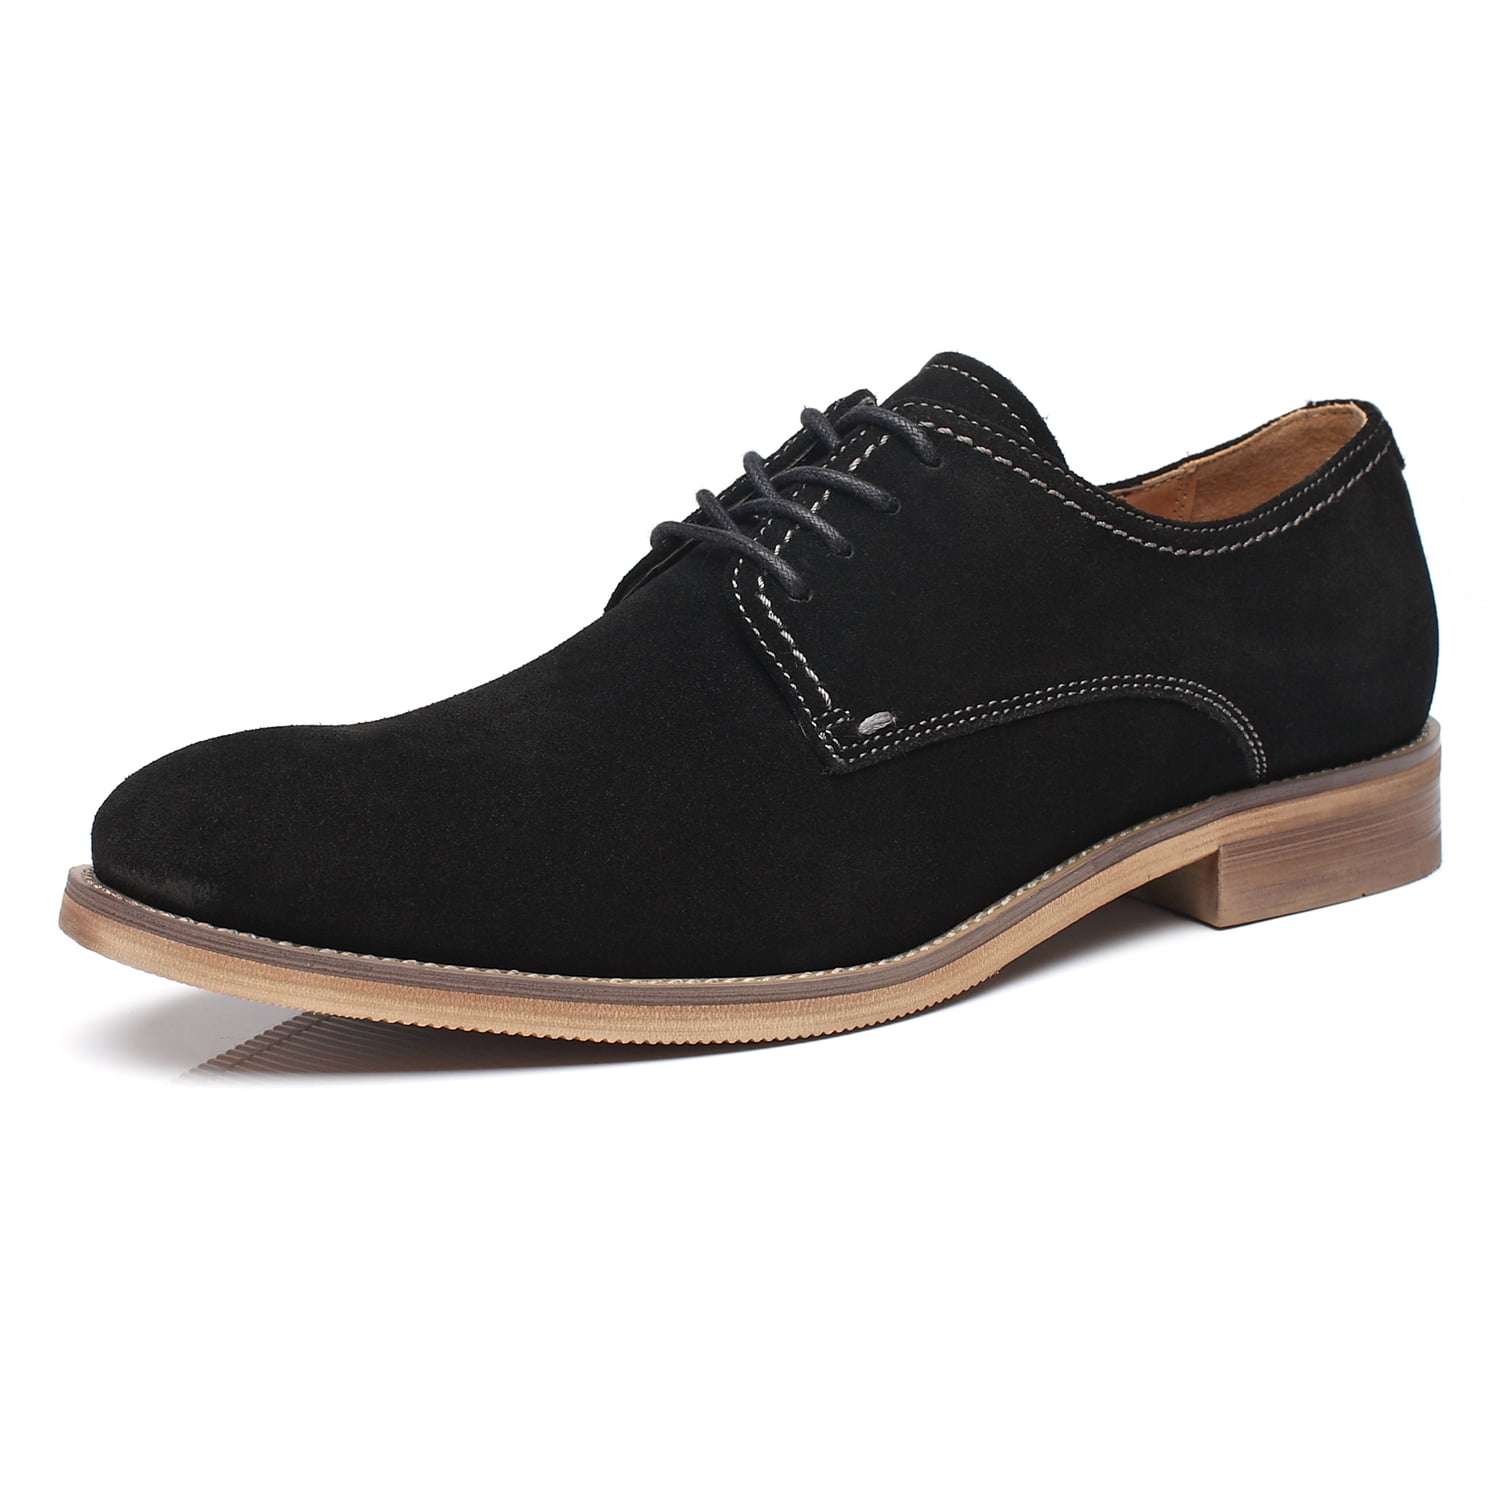 Vintage Mens Formal Lace Up Leather Shoes Pointed Toe Oxfords Casual Dress Work 